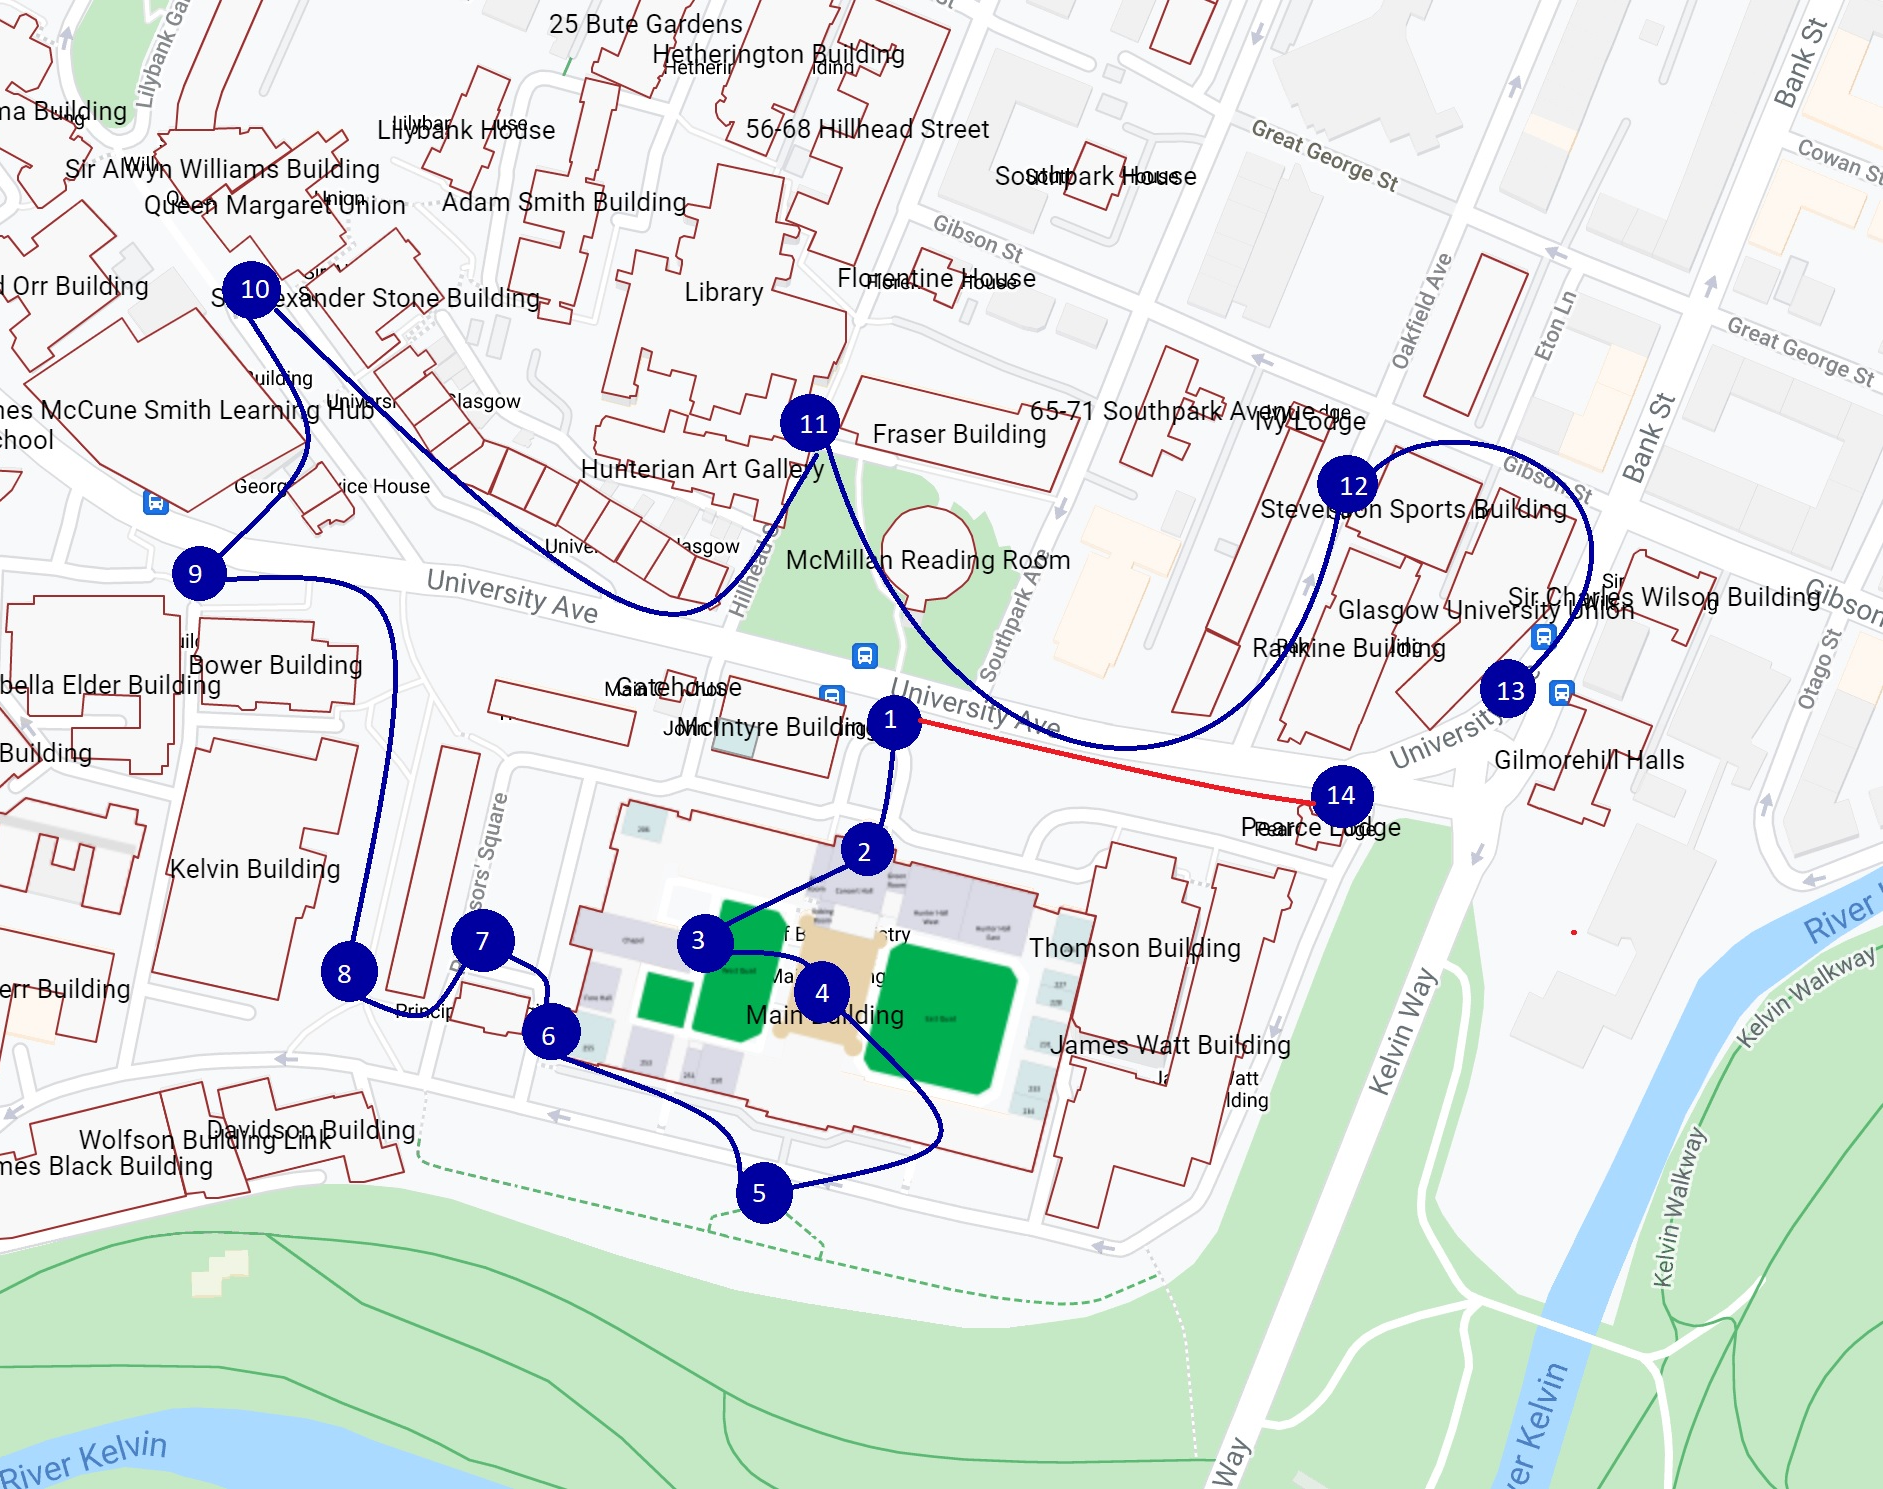 Map of University Campus with Labels for tour route